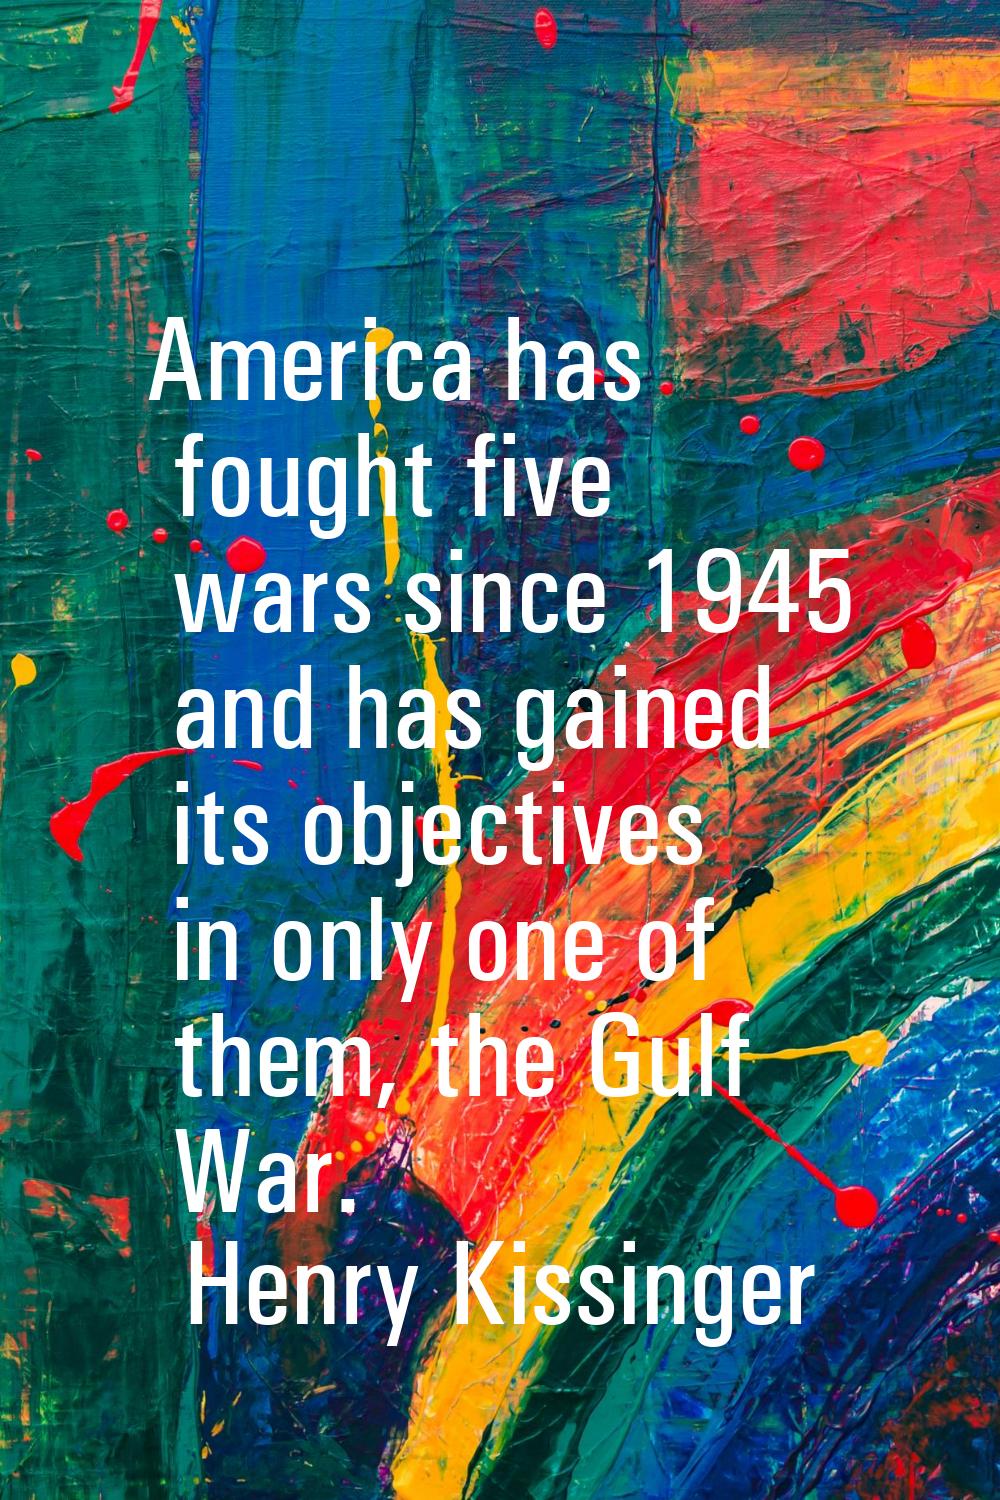 America has fought five wars since 1945 and has gained its objectives in only one of them, the Gulf